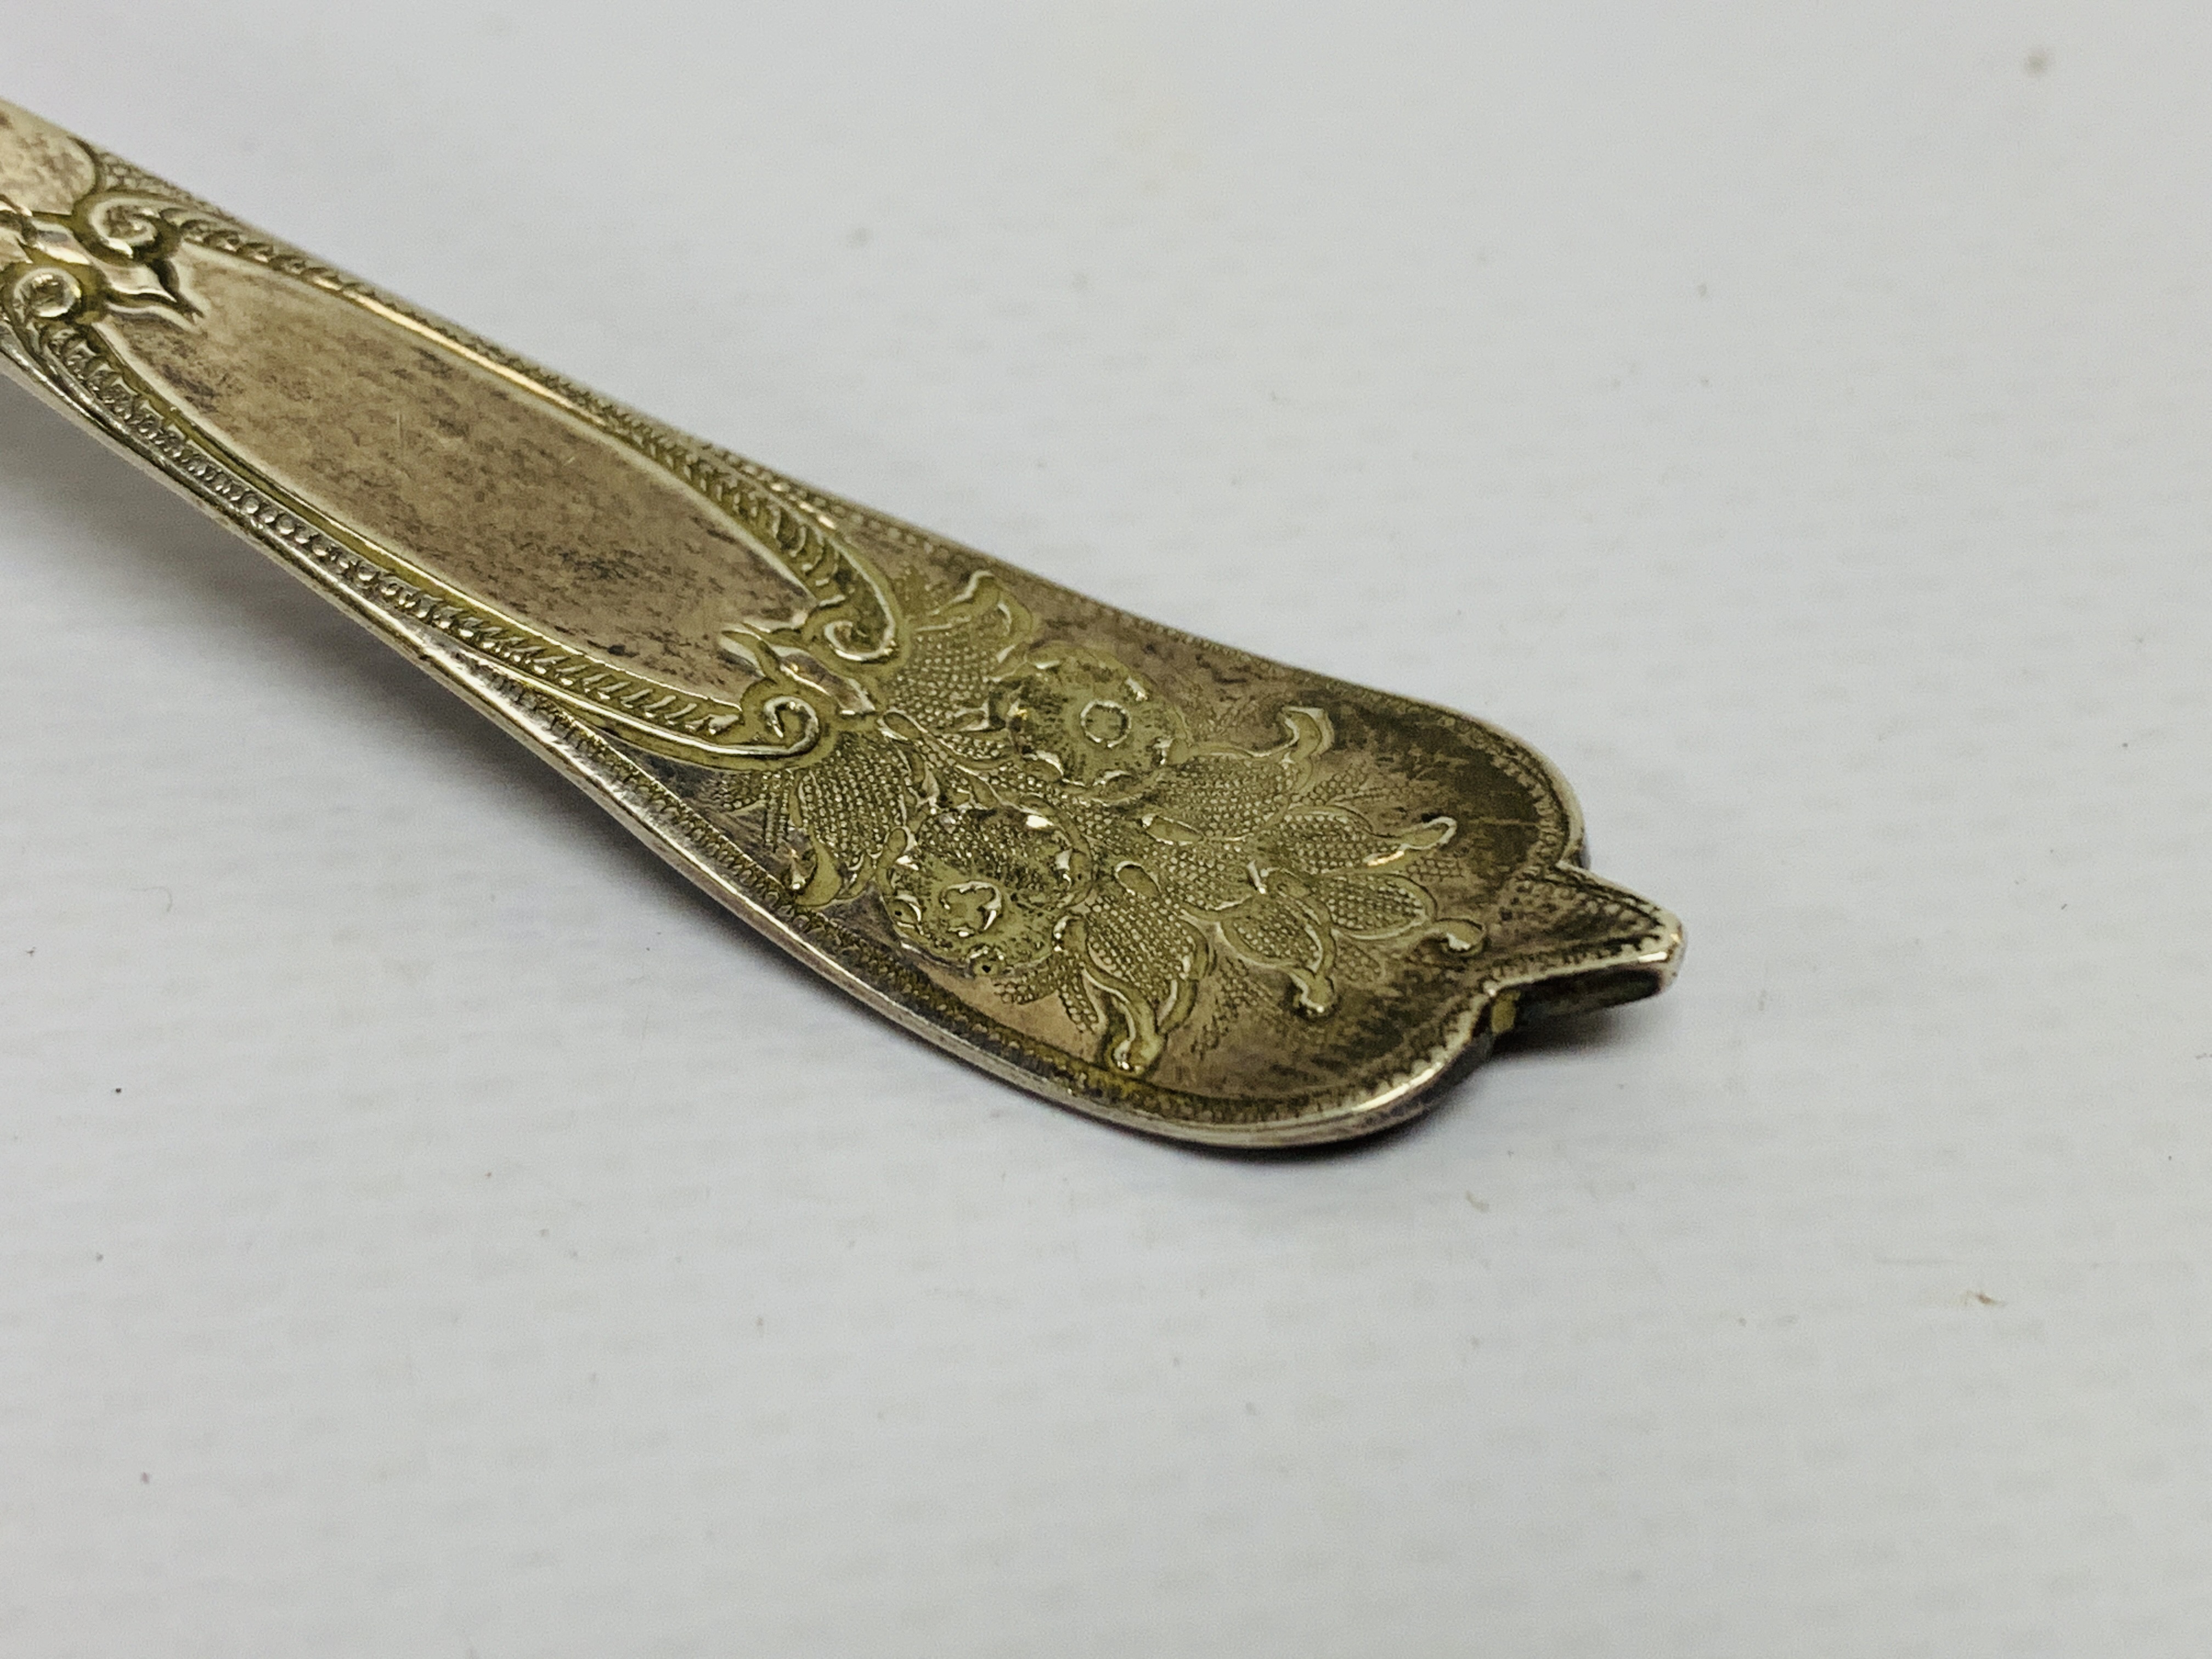 A SILVER SIFTER SPOON, HESTER BATEMAN, LONDON 1784, - Image 4 of 8